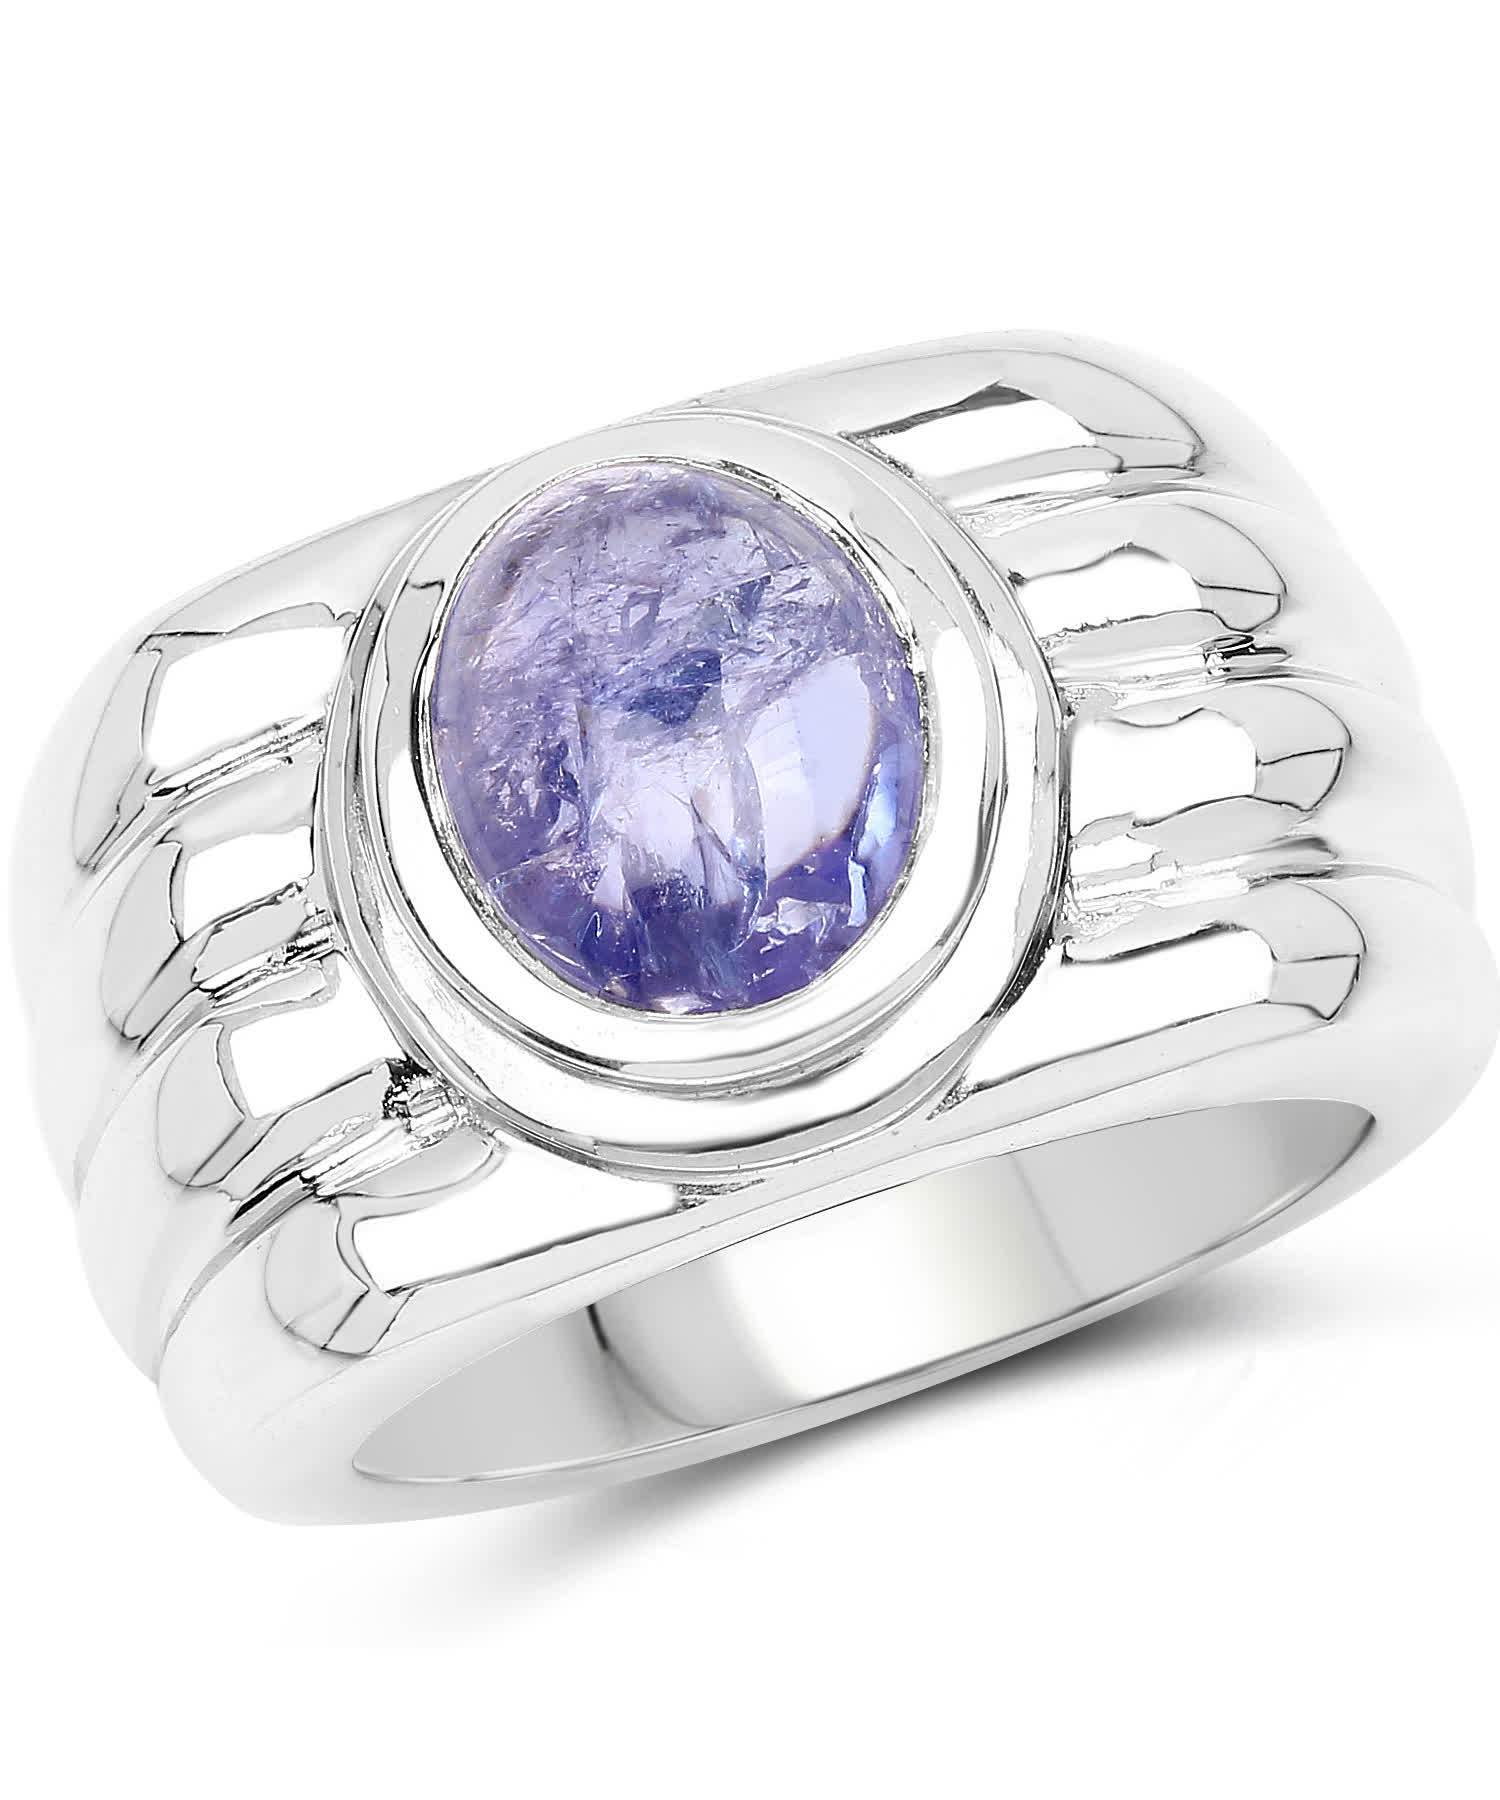 3.55ctw Natural Tanzanite Rhodium Plated 925 Sterling Silver Right Hand Ring View 1